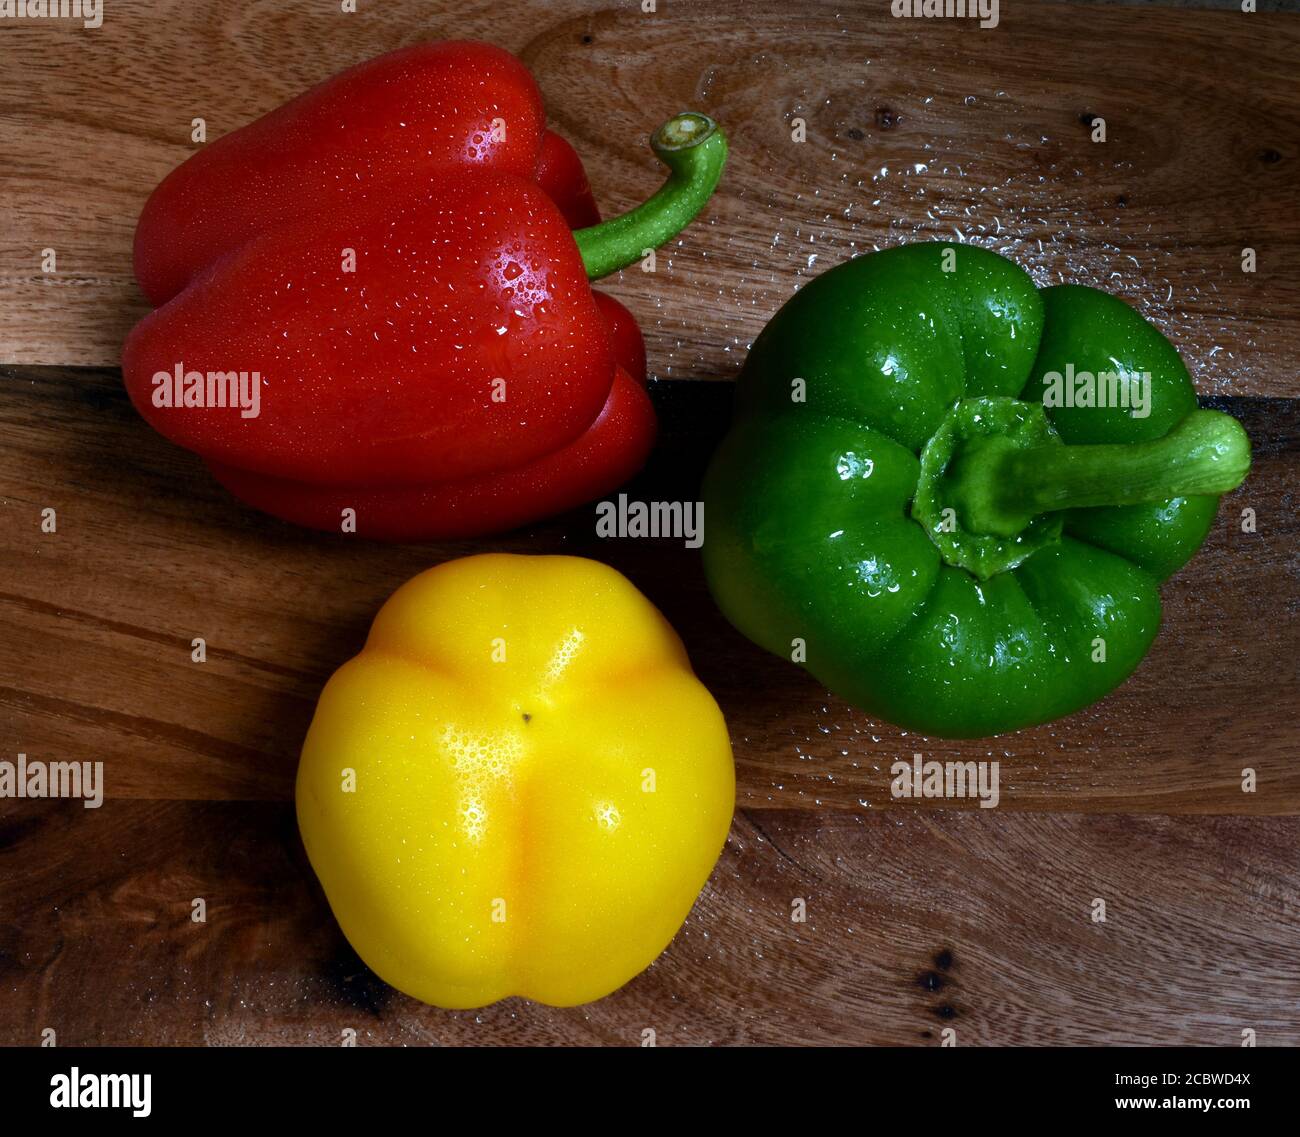 Sweet bell peppers (capsicum), Red green and yellow, fresh, washed and wet showing top, side and beneath on wooden chopping board under natural light. Stock Photo